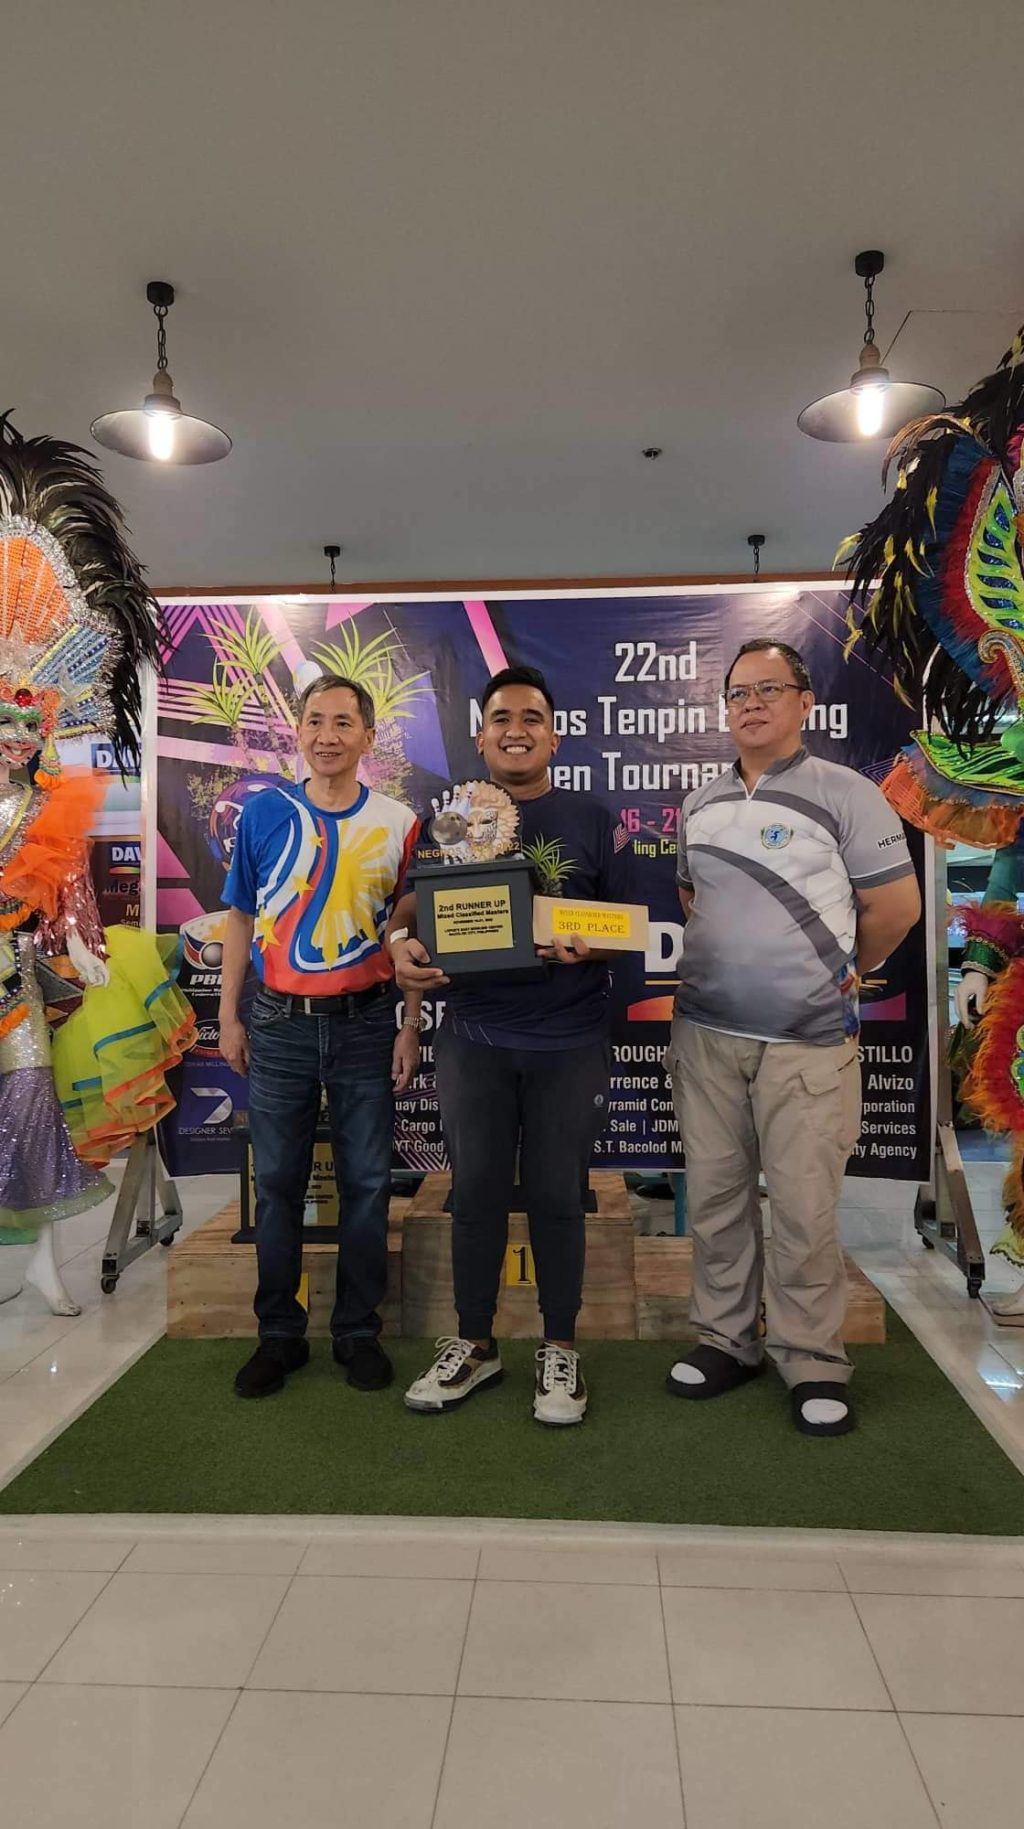 Maeng Viloria is the third placer in the 22nd Negros Tenpin Bowling Open Tournament in Bacolod City. | Contributed Photo